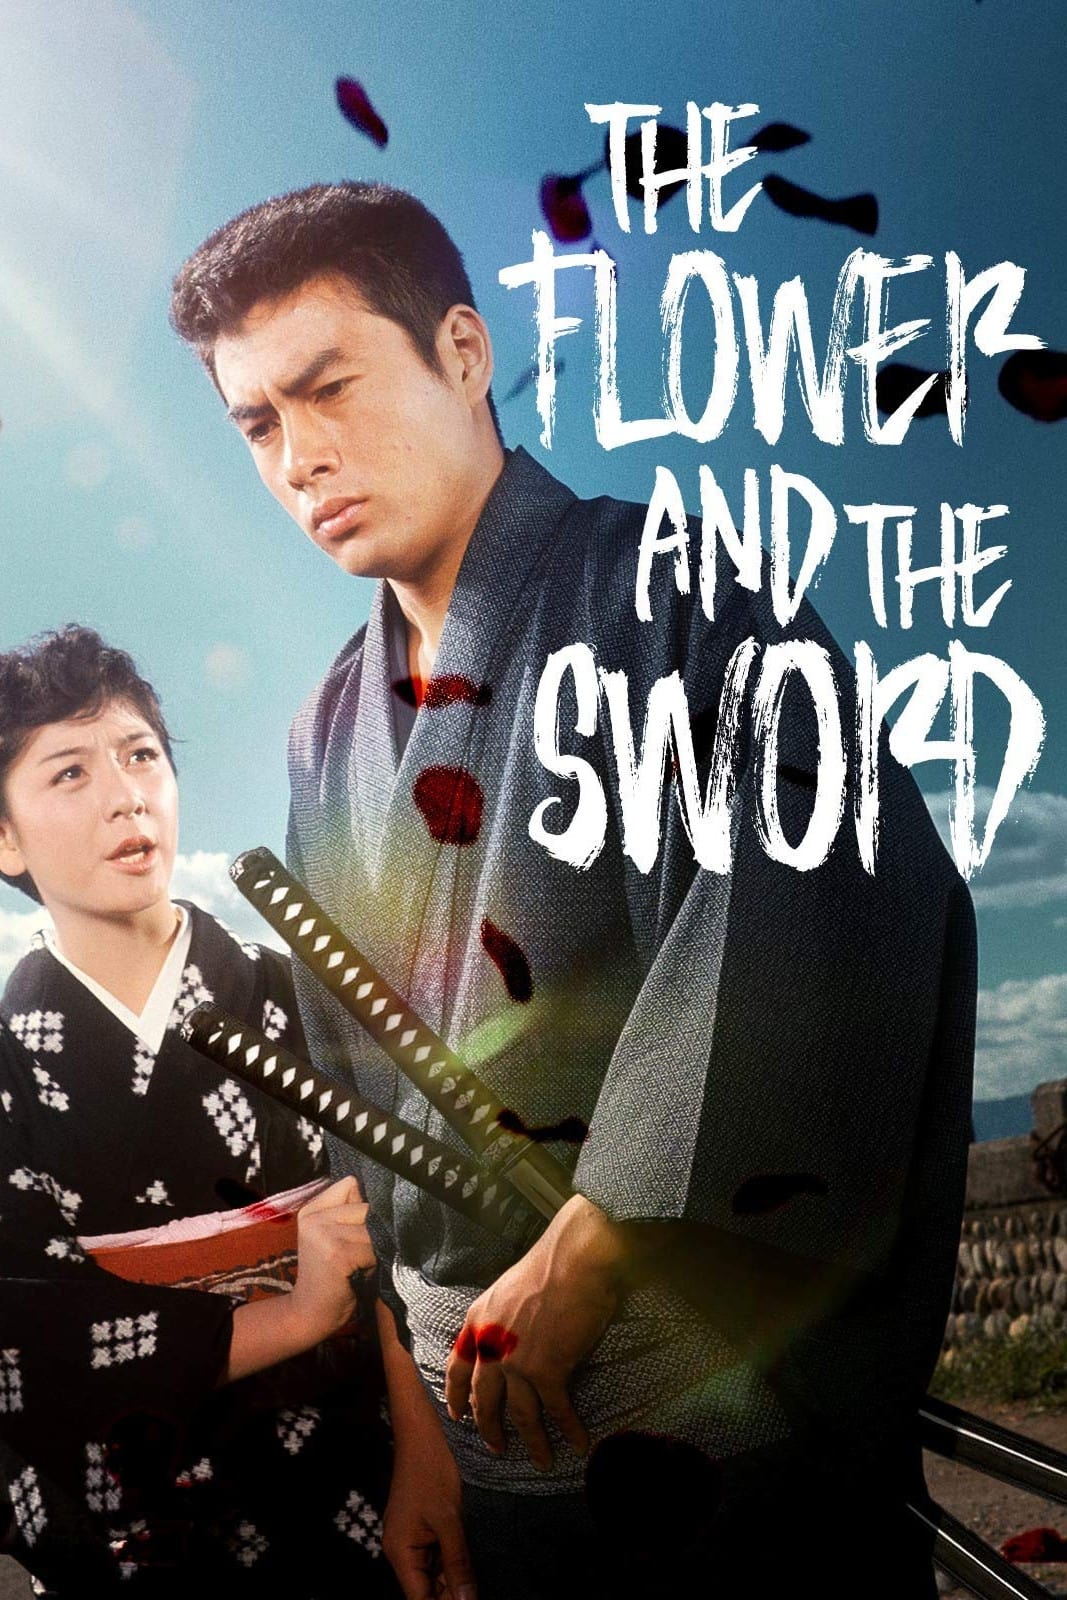 The Flower and the Sword (1964)